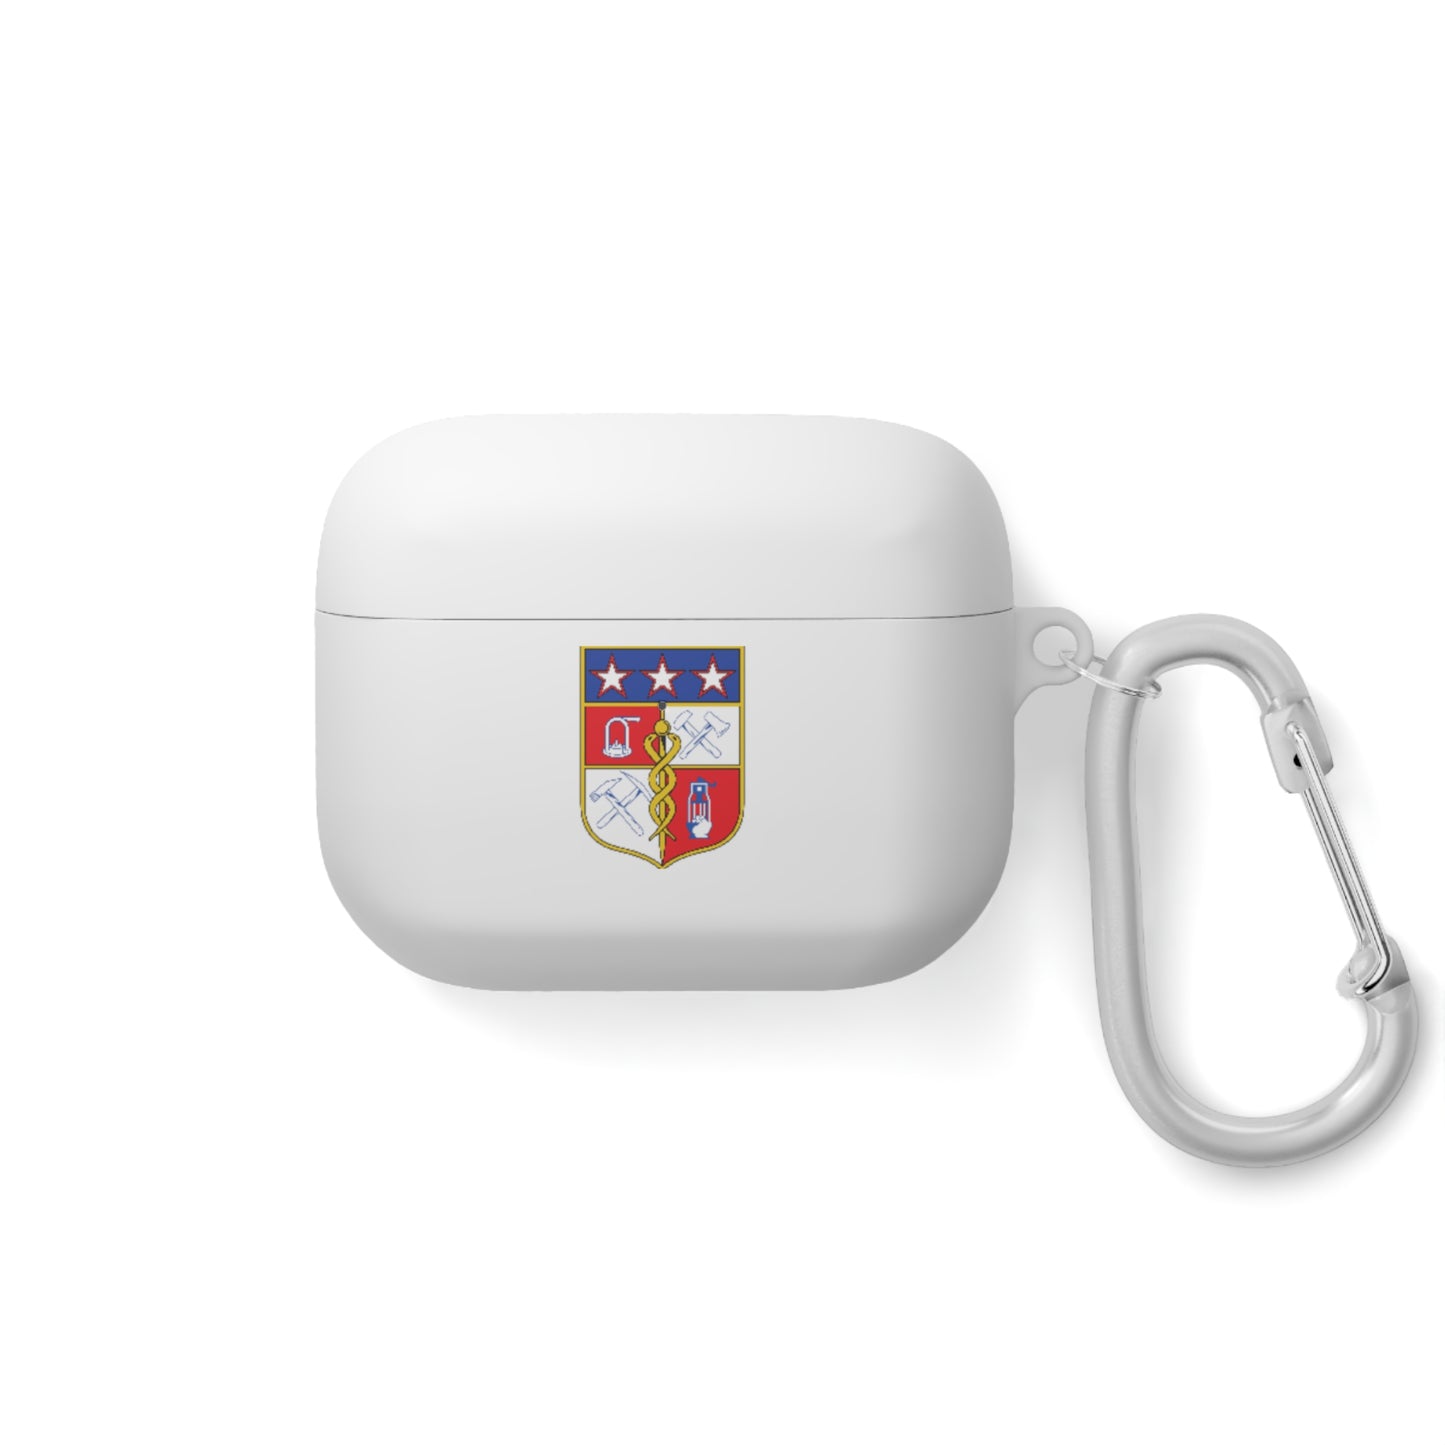 Entente Montceau Les Mines AirPods and AirPods Pro Case Cover